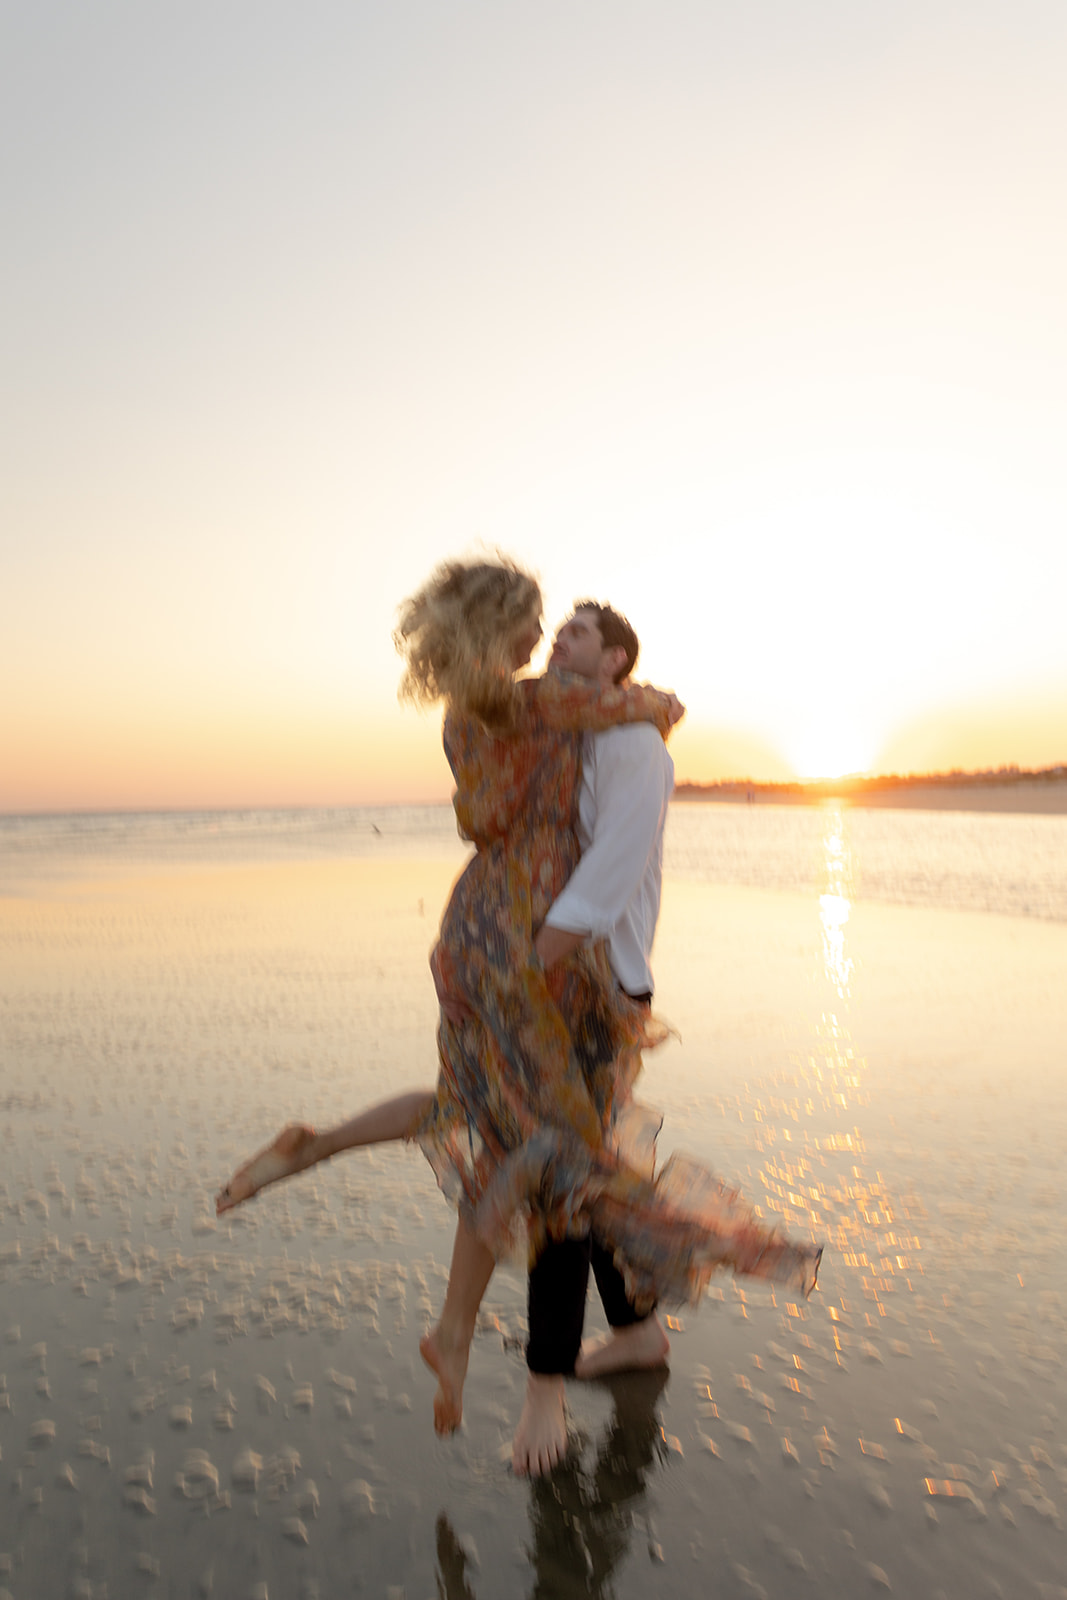 Charleston Beach Engagement Photo. Man picks up woman and twirls in low water with sunset in background